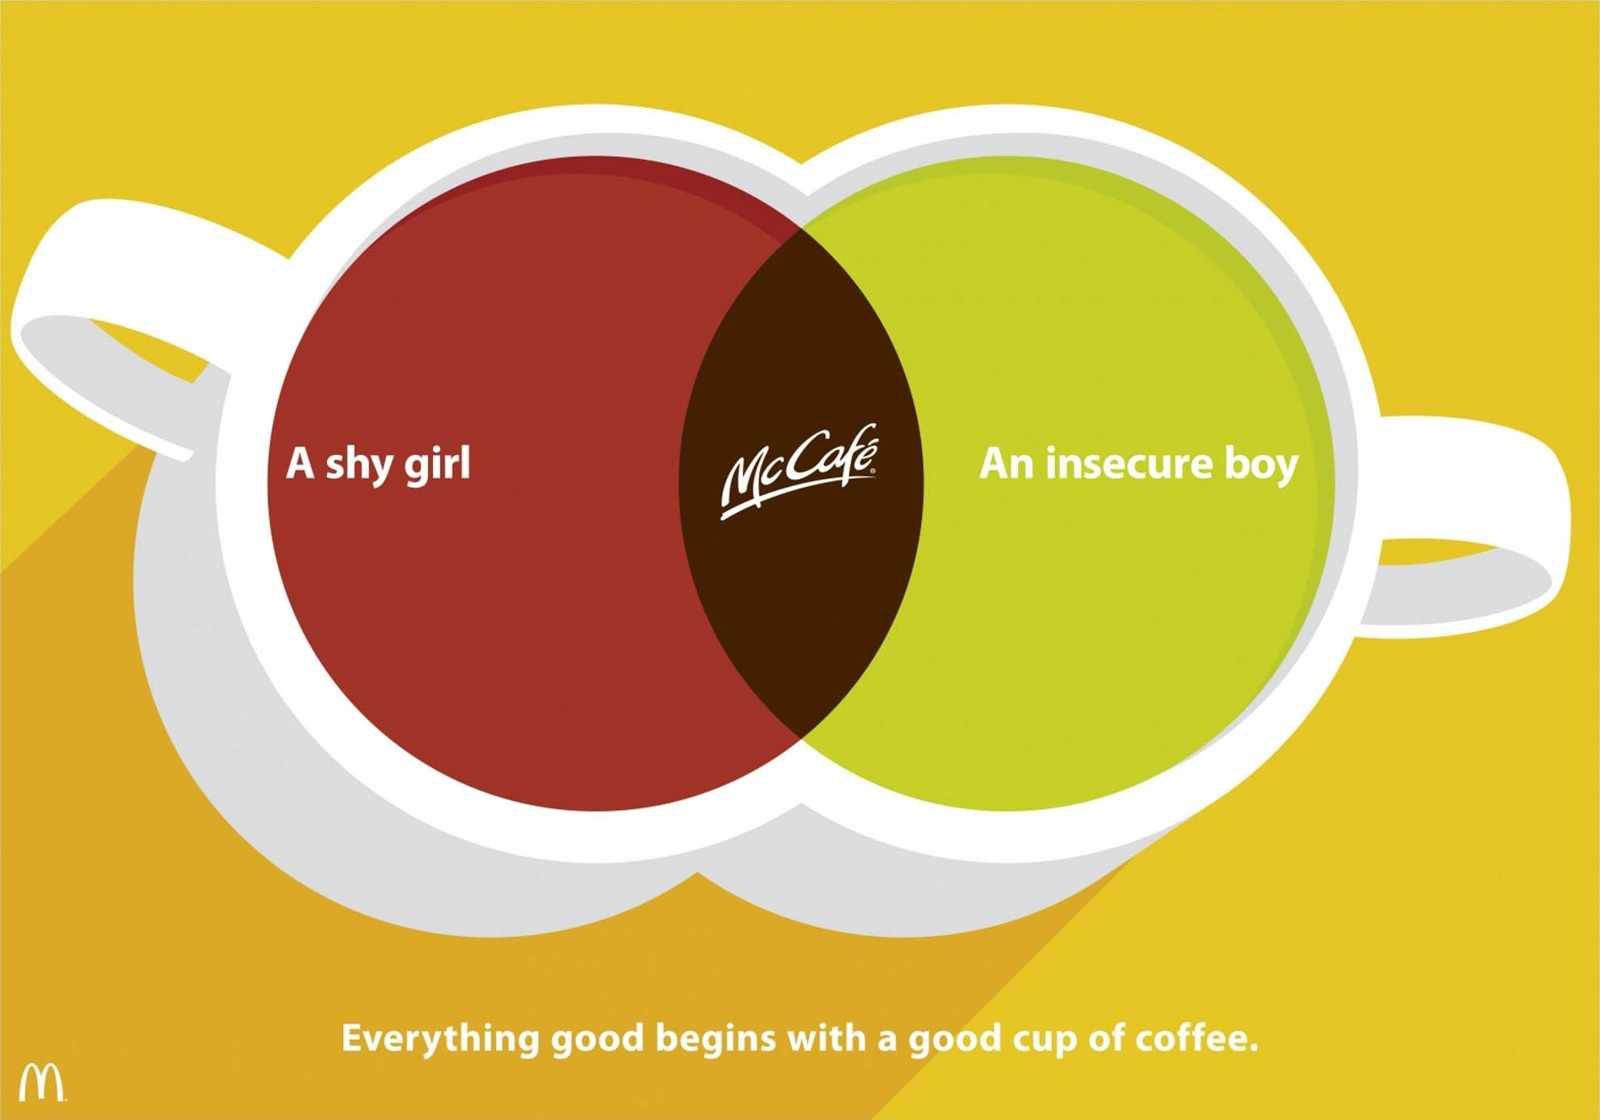 "Everything good begins with a good cup of coffee" | Agence : TBWA, Berlin, Allemagne, pour McCafé de McDonald's